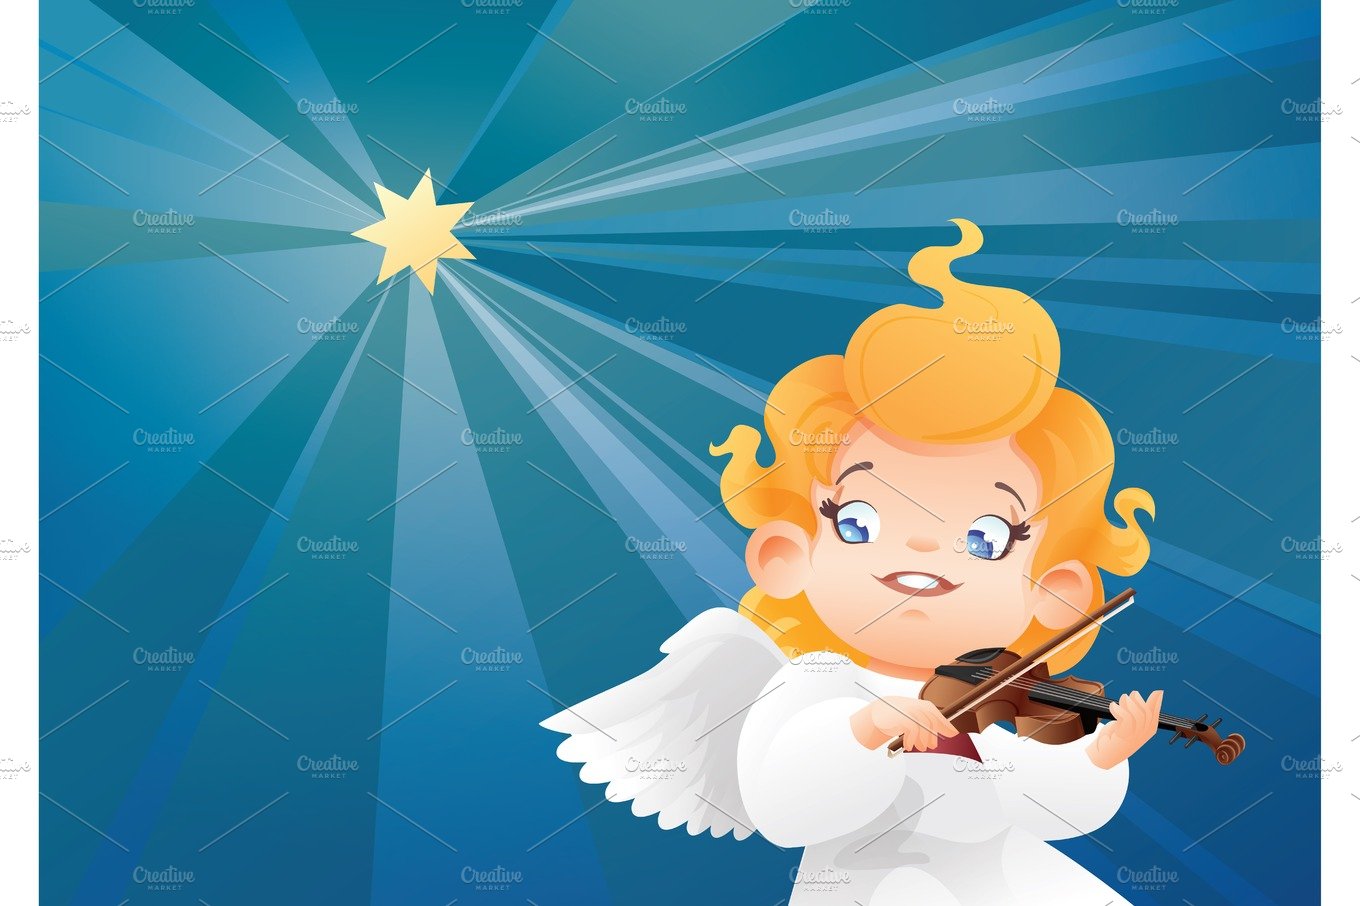 Smilyng flying on a night sky kid angel musician violinist play cover image.